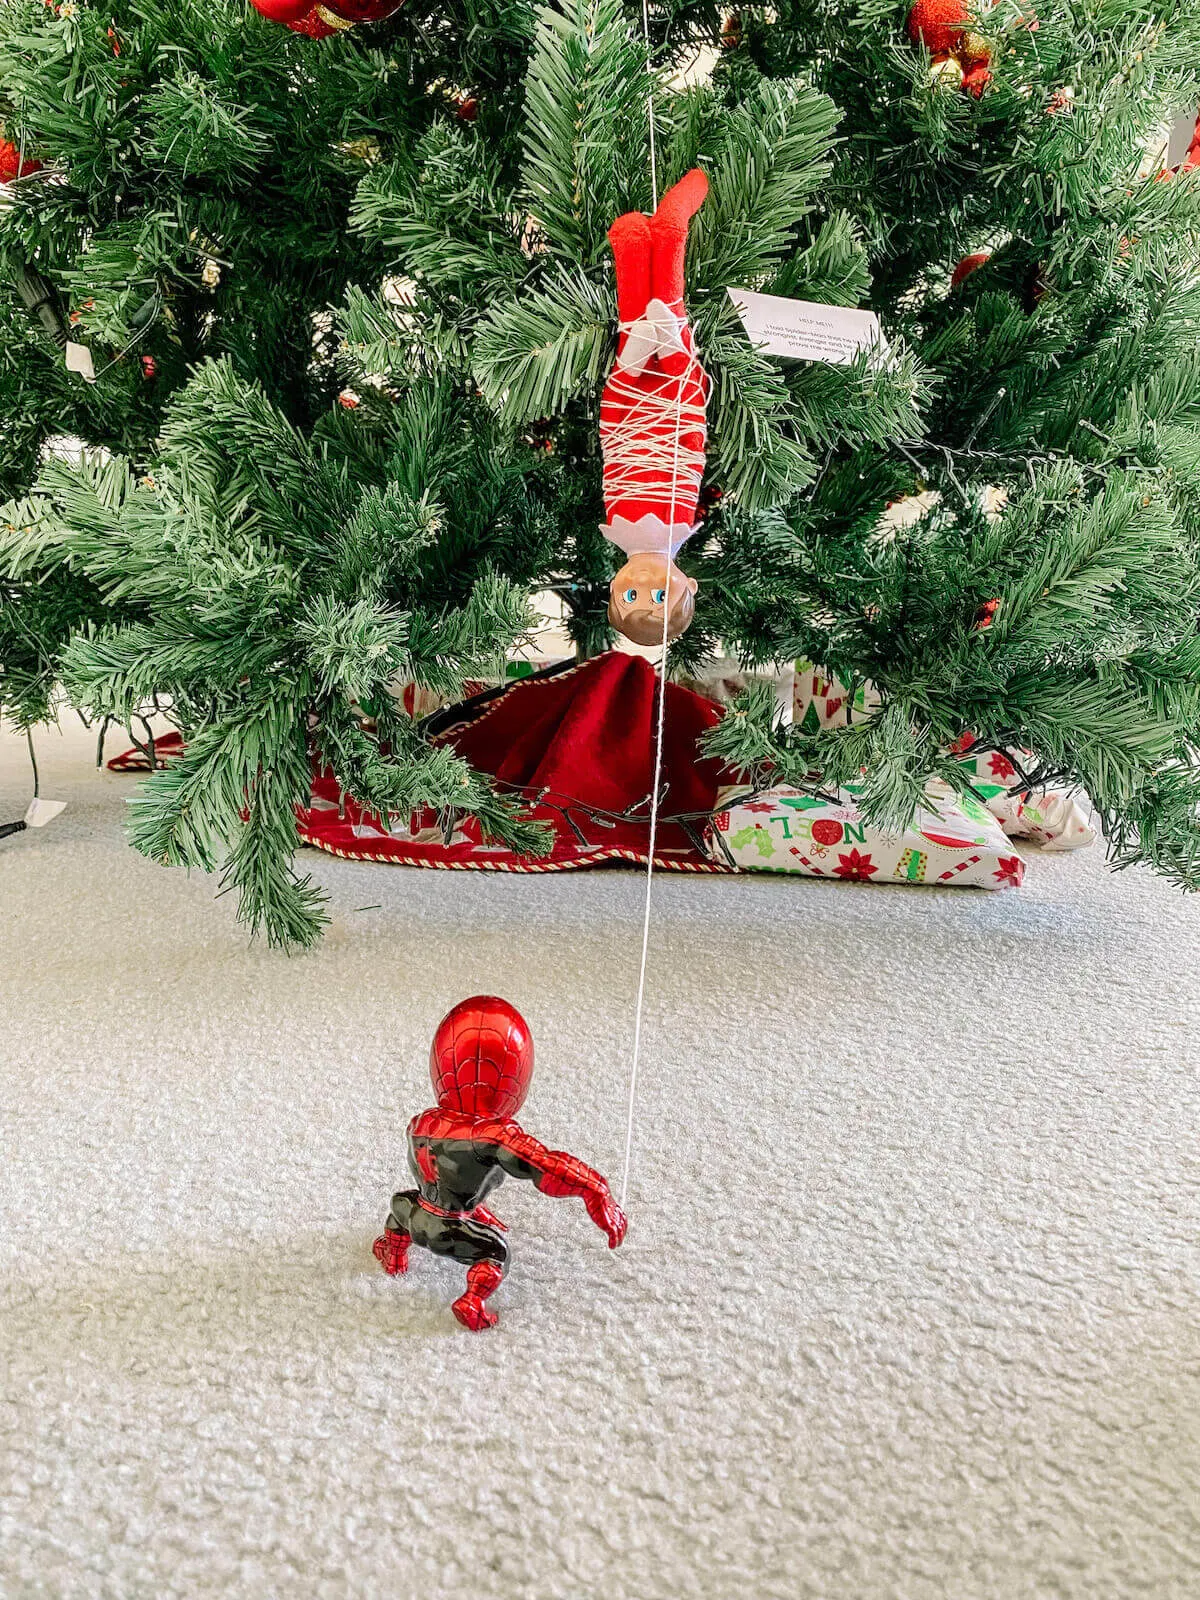 Spider-man with elf on the shelf in web